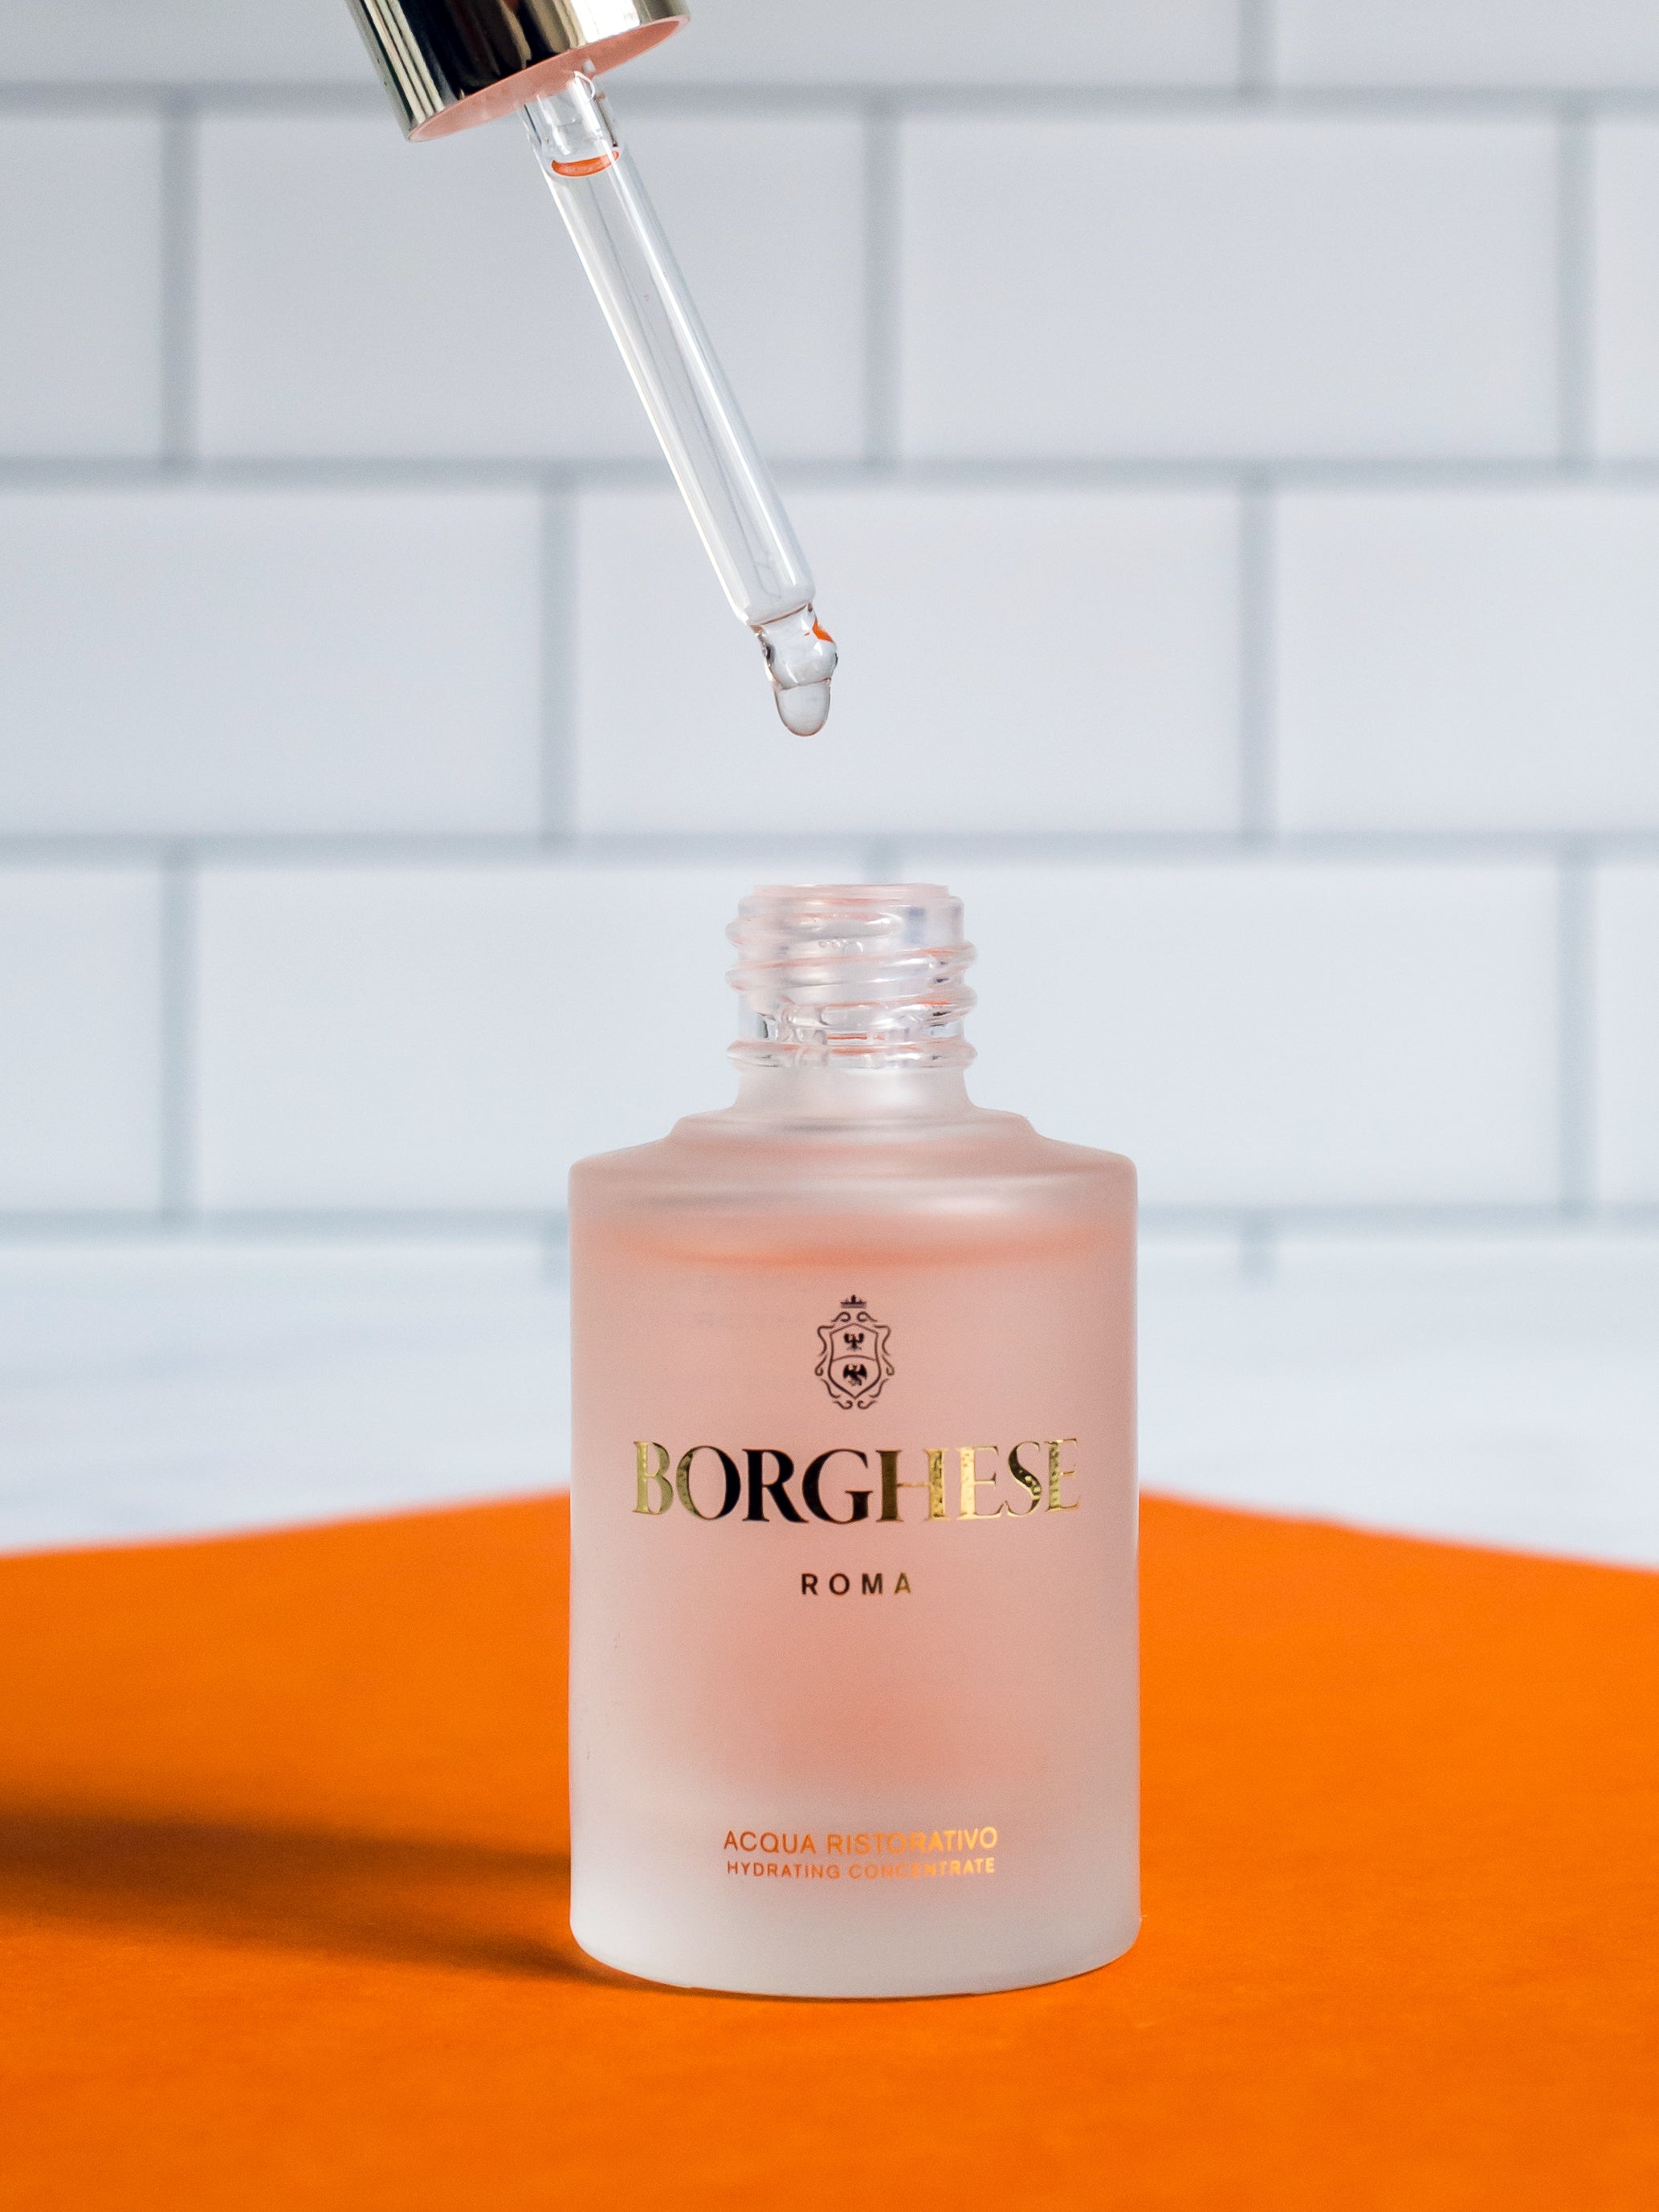 Picture of Acqua Ristorativo Hydrating Concentrate with dropper dripping concentrate into bottle